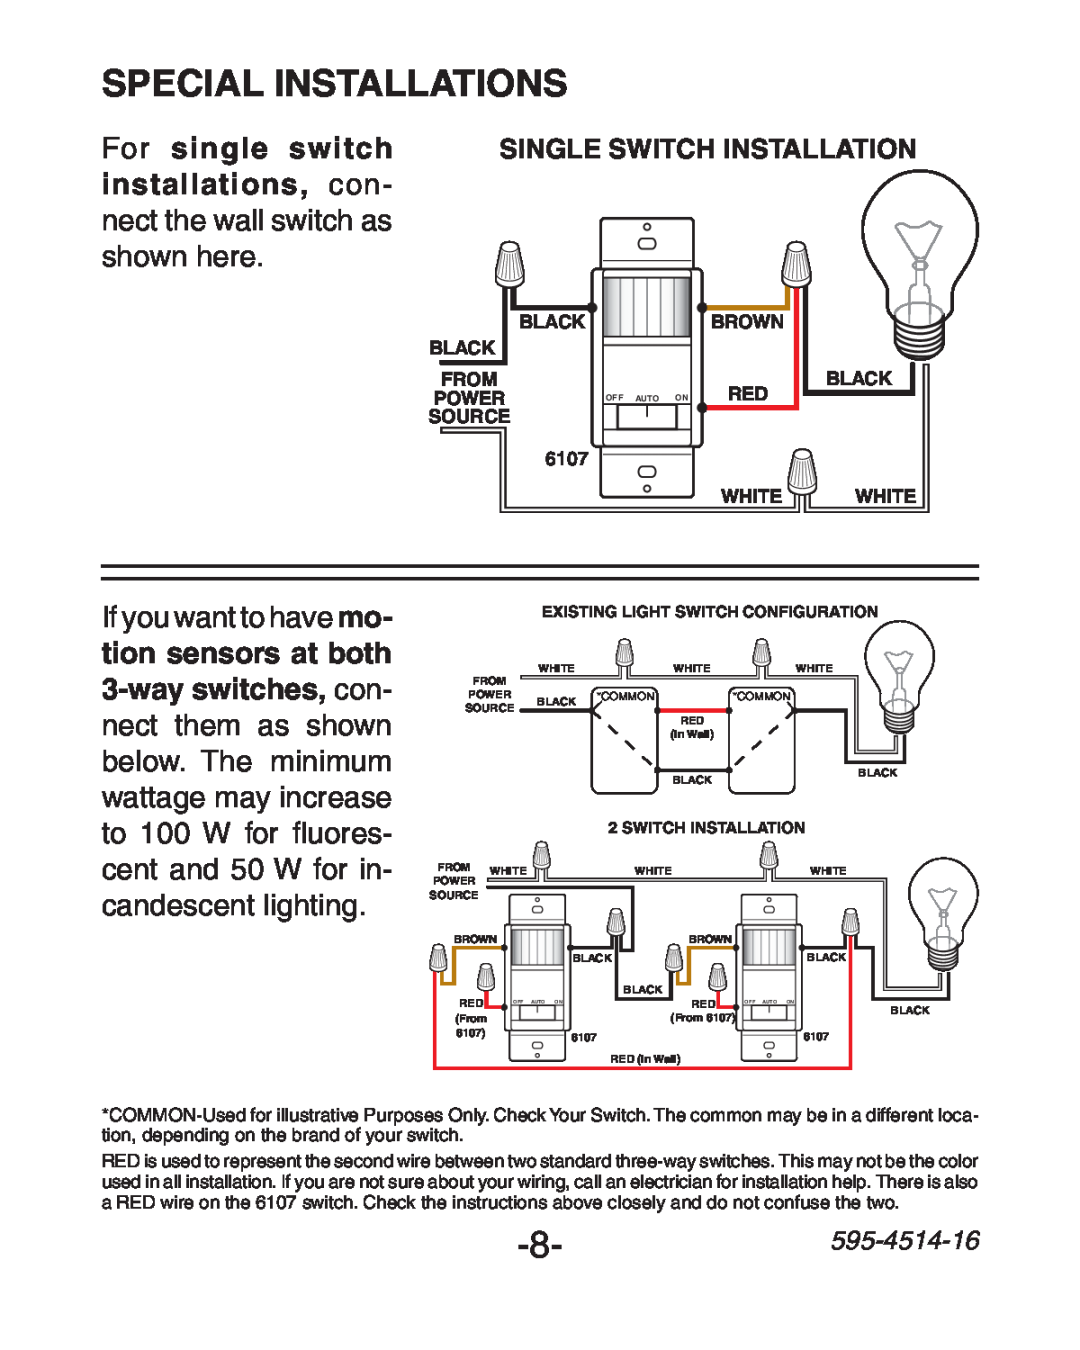 Heath Zenith 6107 Special Installations, For single switch SINGLE SWITCH INSTALLATION, 595-4514-16, Black Black, Brown 